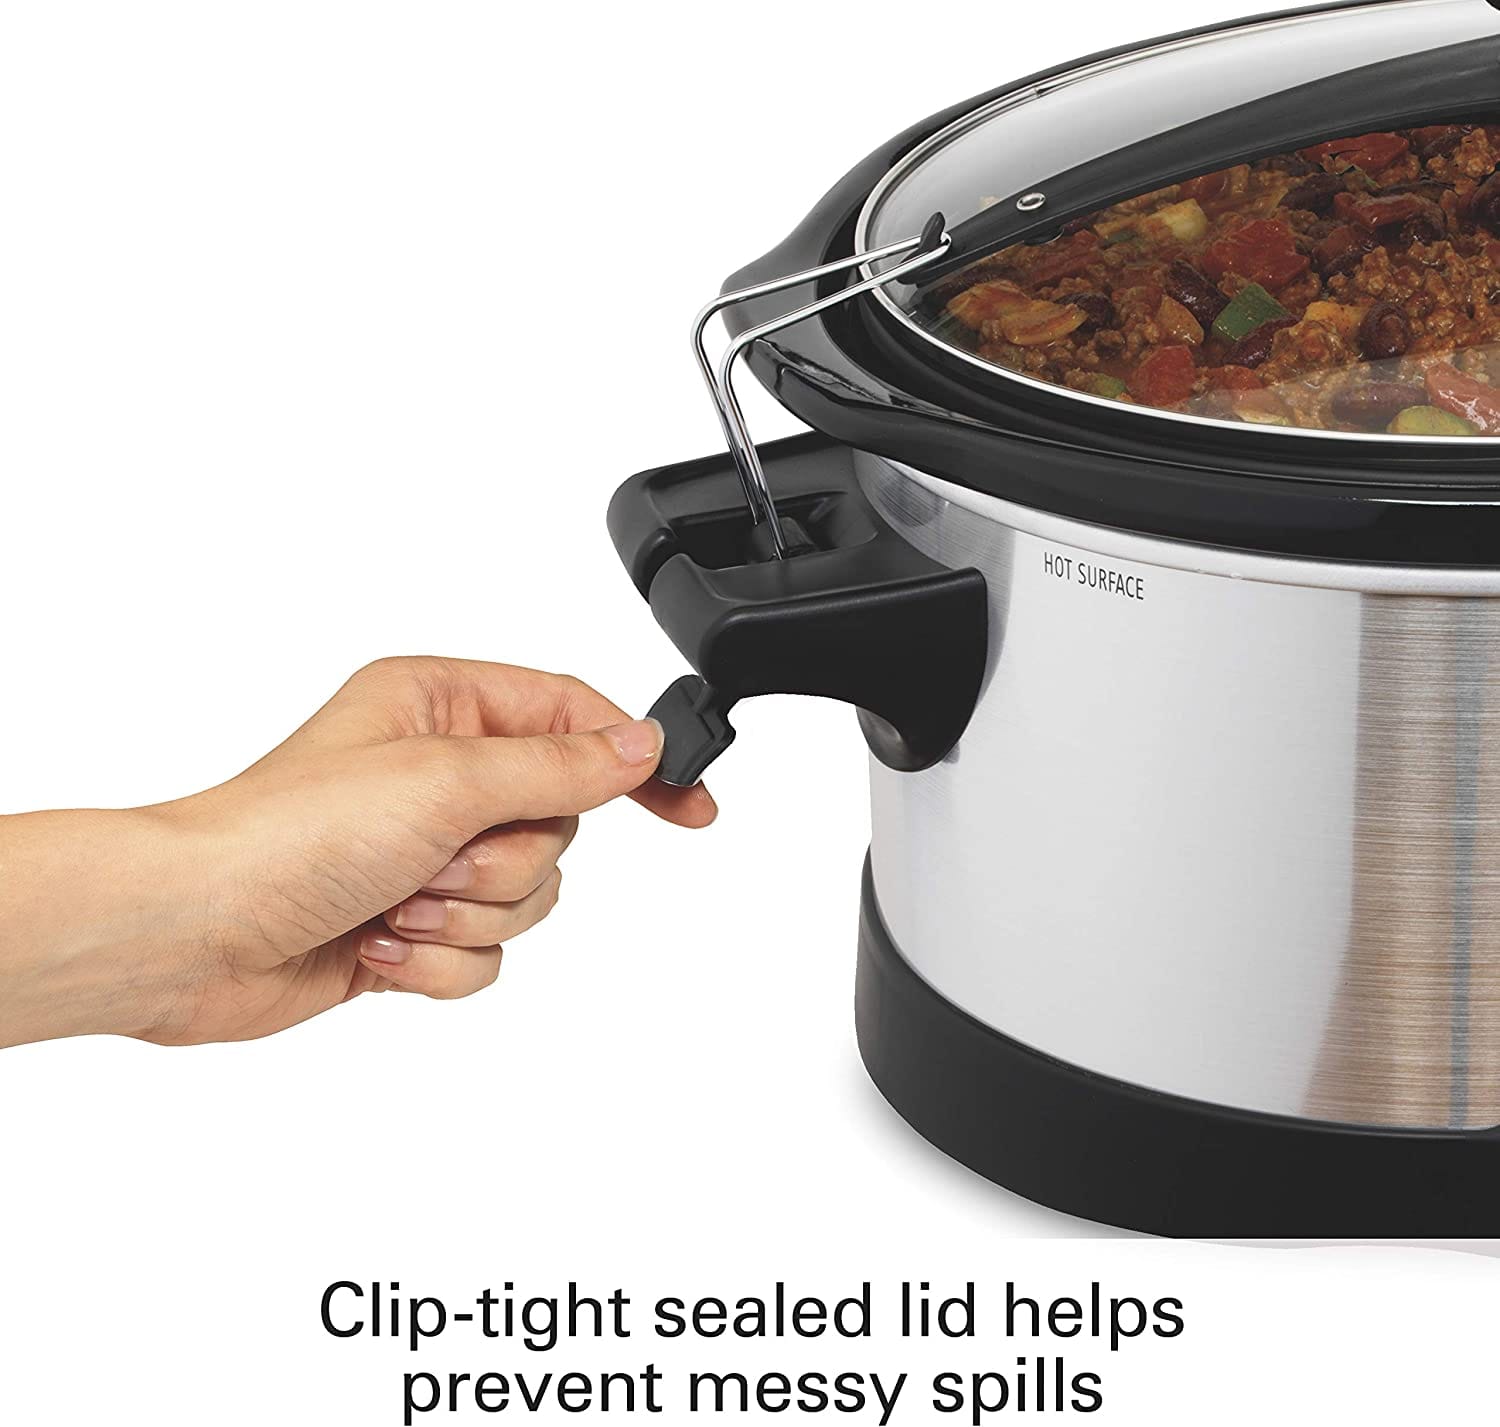 Hamilton Beach Stay or Go Portable 6-Quart Slow Cooker With Lid Lock, Dishwasher-Safe Crock 33262 - 04009433262